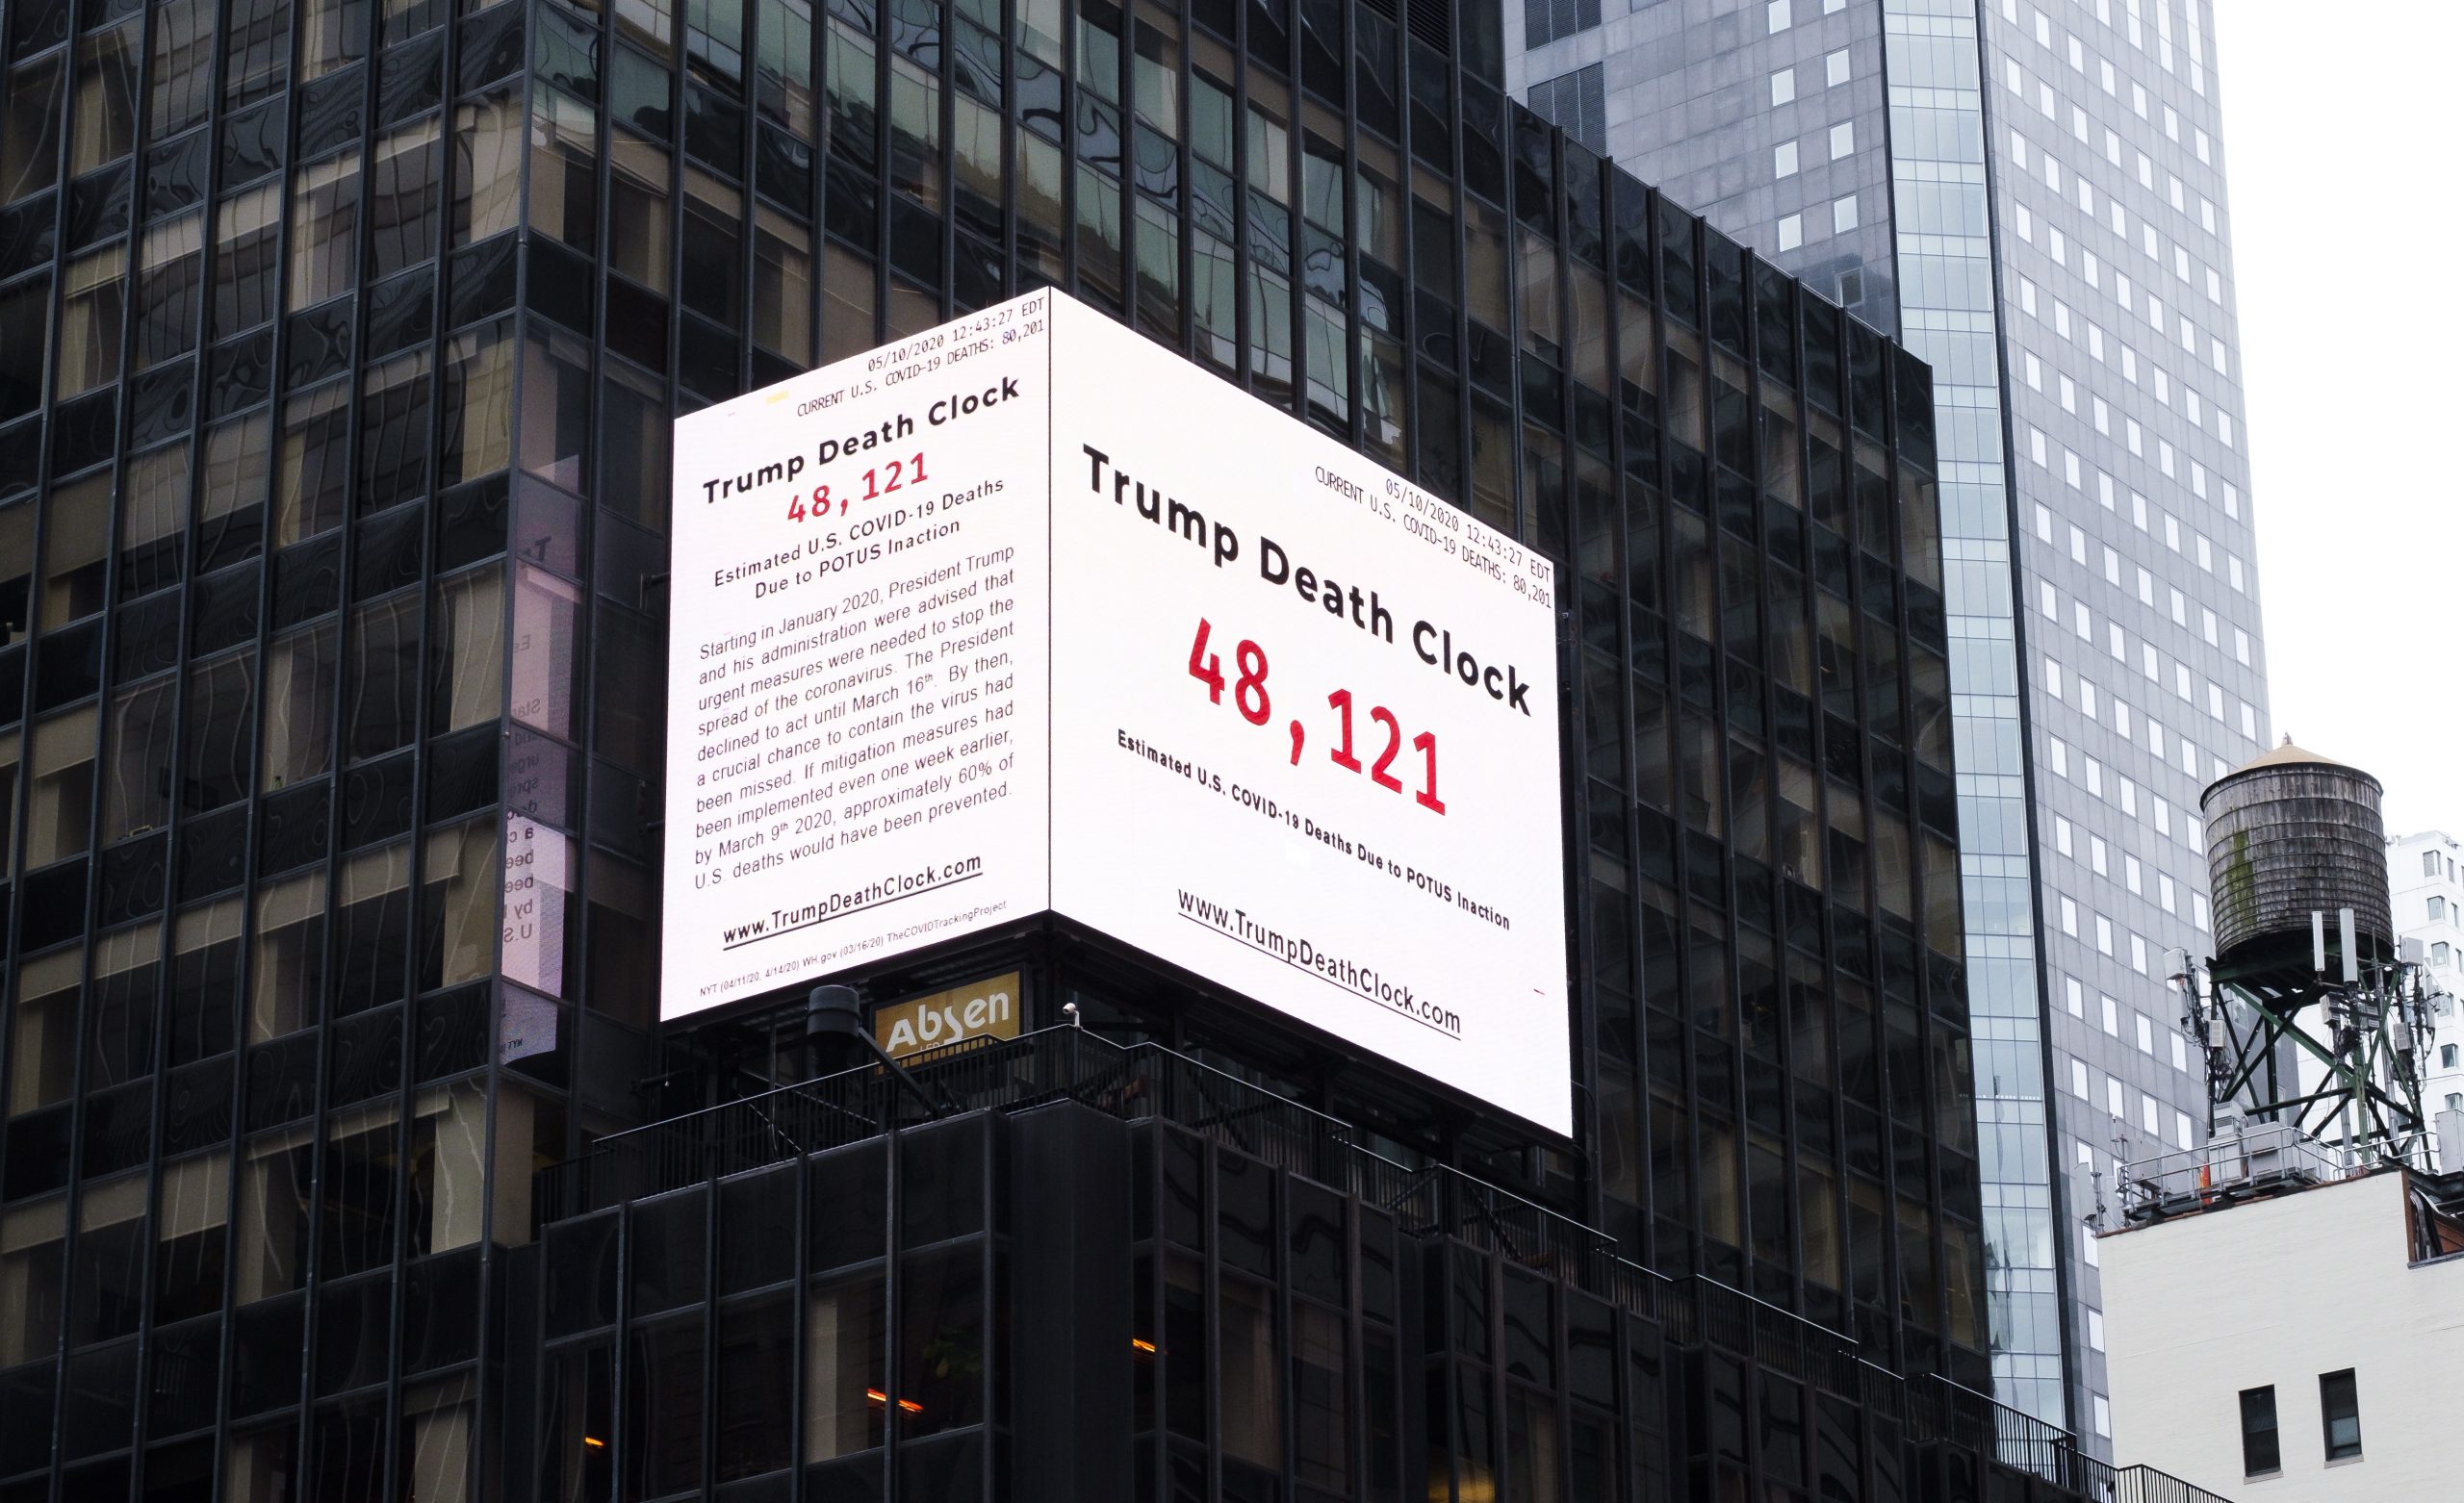 epa08415432 A billboard in Times Square shows the estimated number of people who have died of COVID-19 in the United States since the start of the coronavirus pandemic under the title 'Trump Death Clock' in New York, New York, USA, 11 May 2020. The billboard is an offspring of a website started by filmmaker Eugene Jarecki and shows the number of the estimated number of victims being updated in real-time.  EPA/JUSTIN LANE